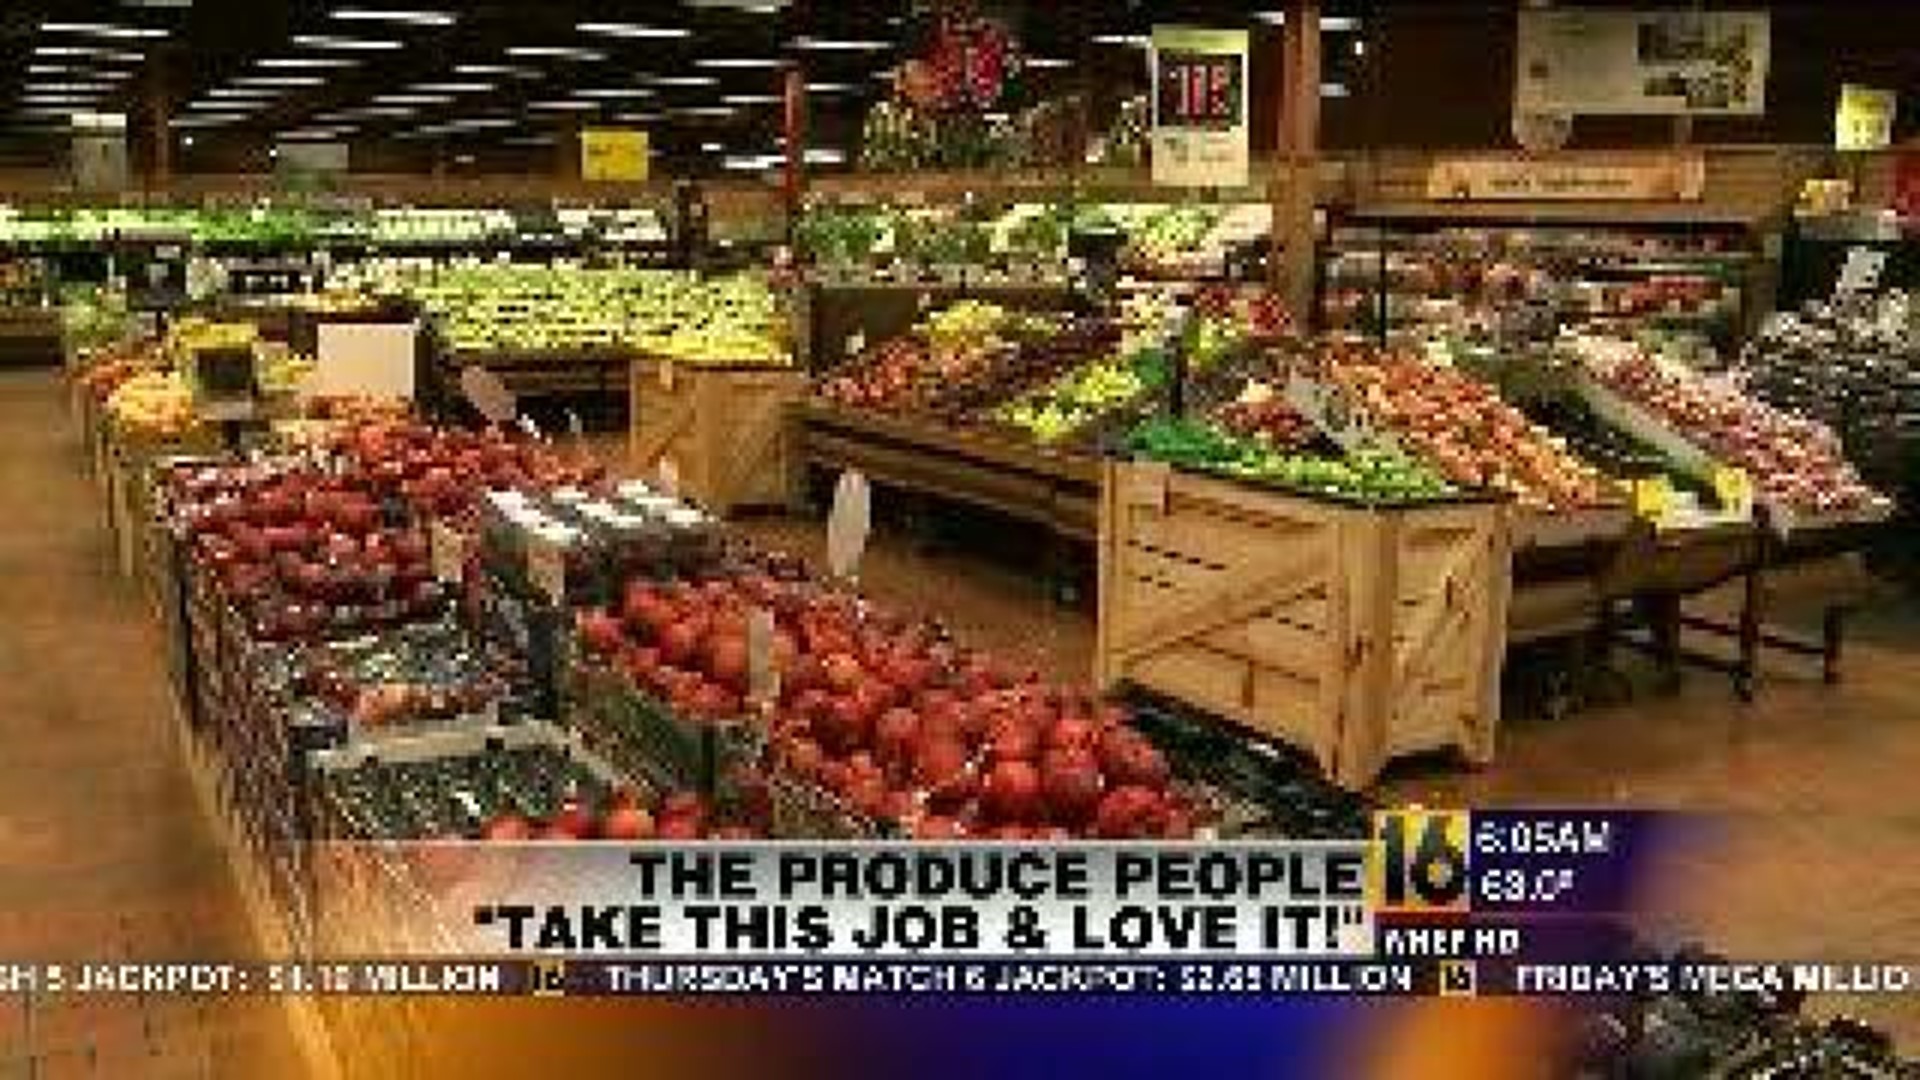 Take This Job And Love It: The Produce People